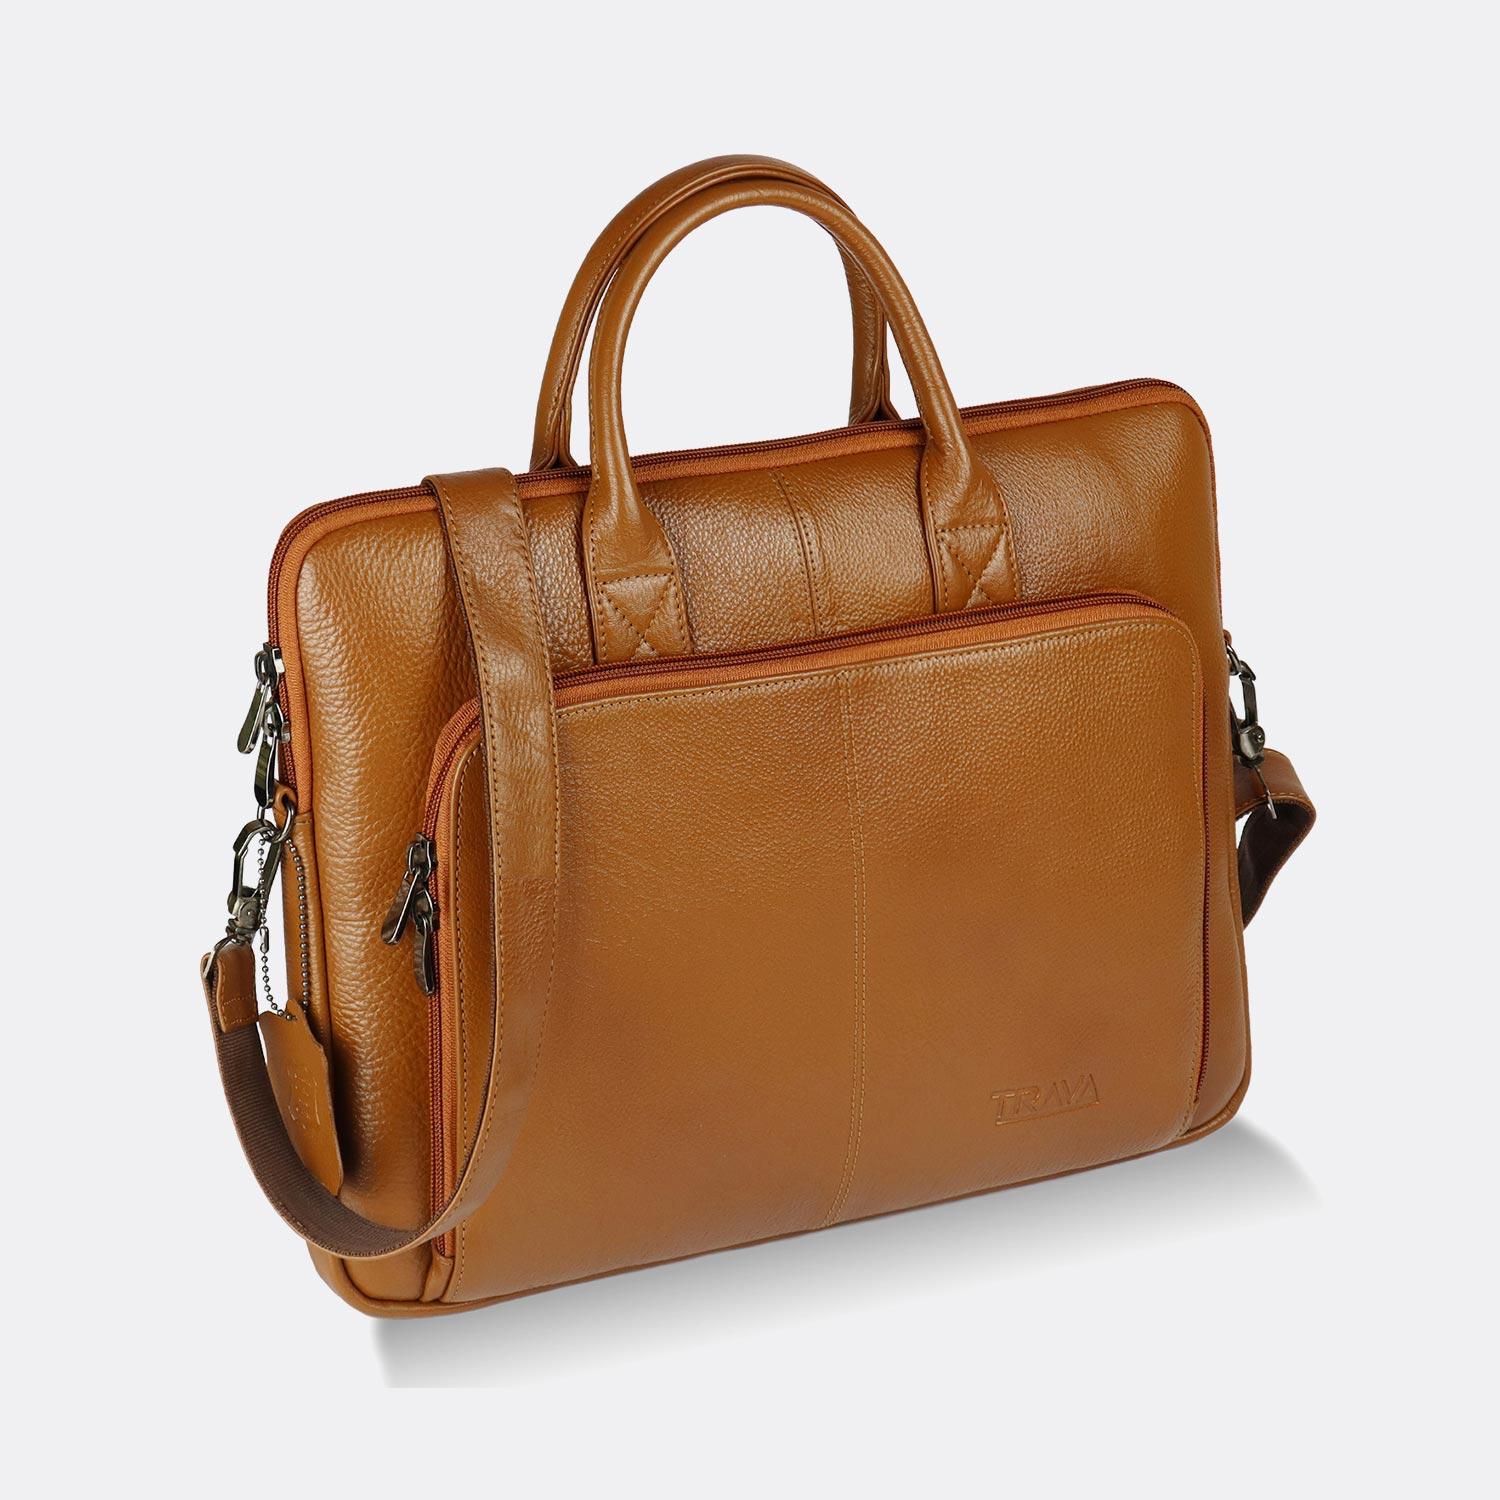 Bria Woven Leather Laptop Tote